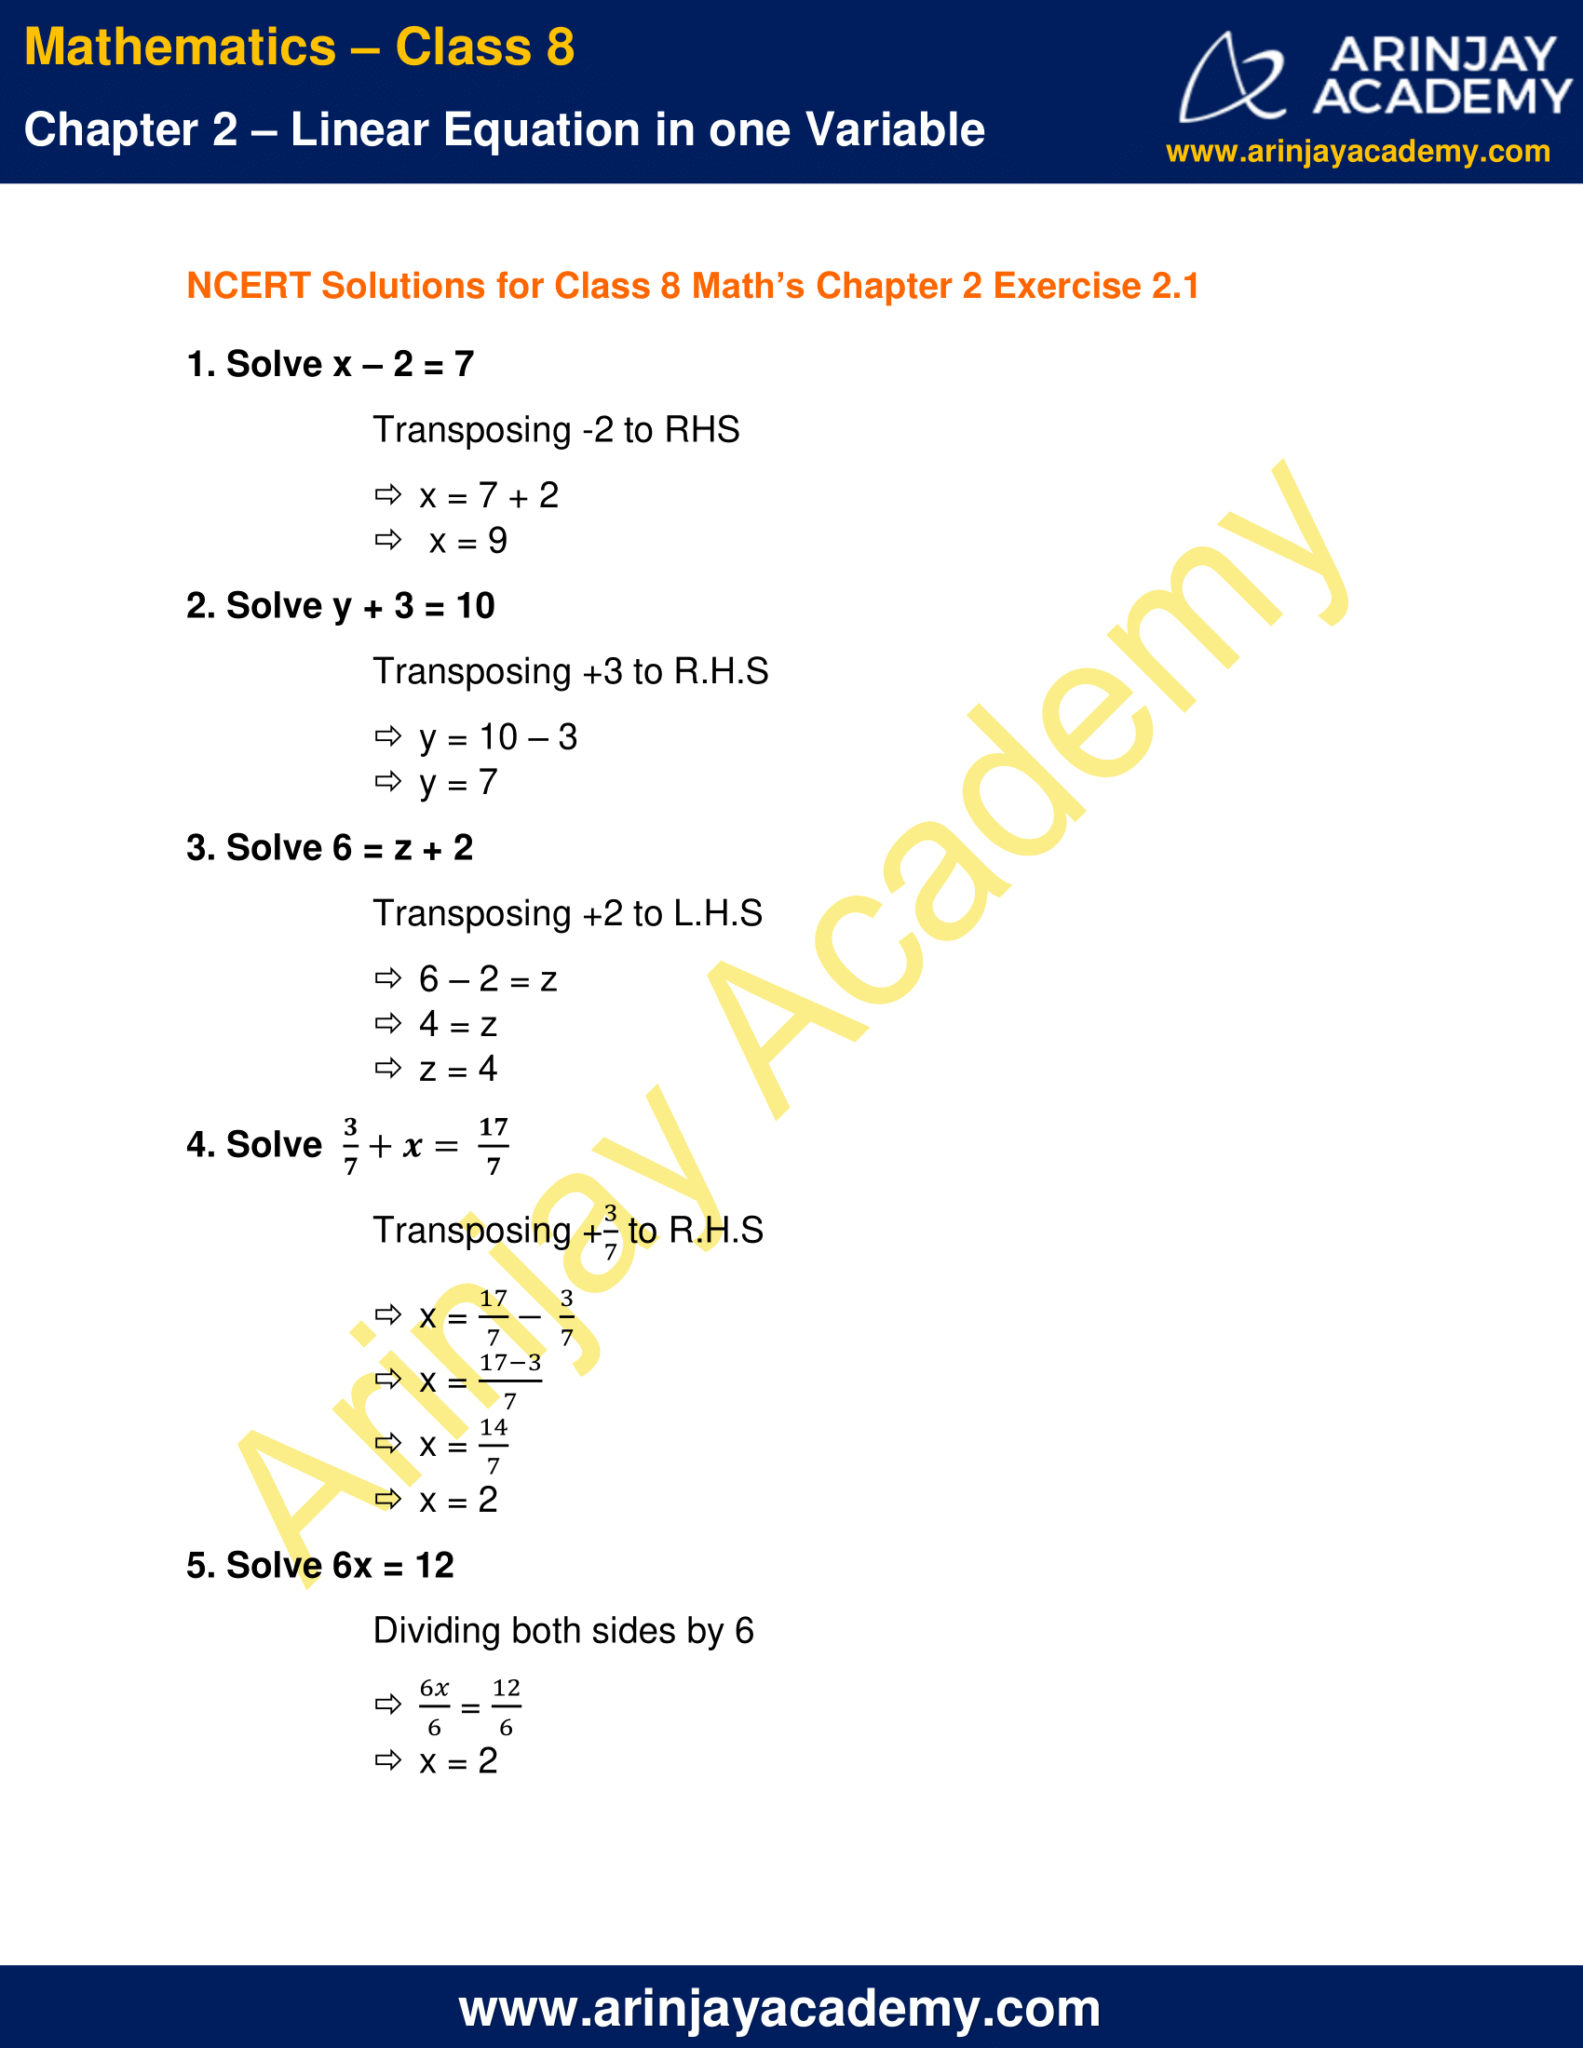 ncert-solutions-for-class-8-maths-exercise-2-2-chapter-2-linear-equation-bank2home